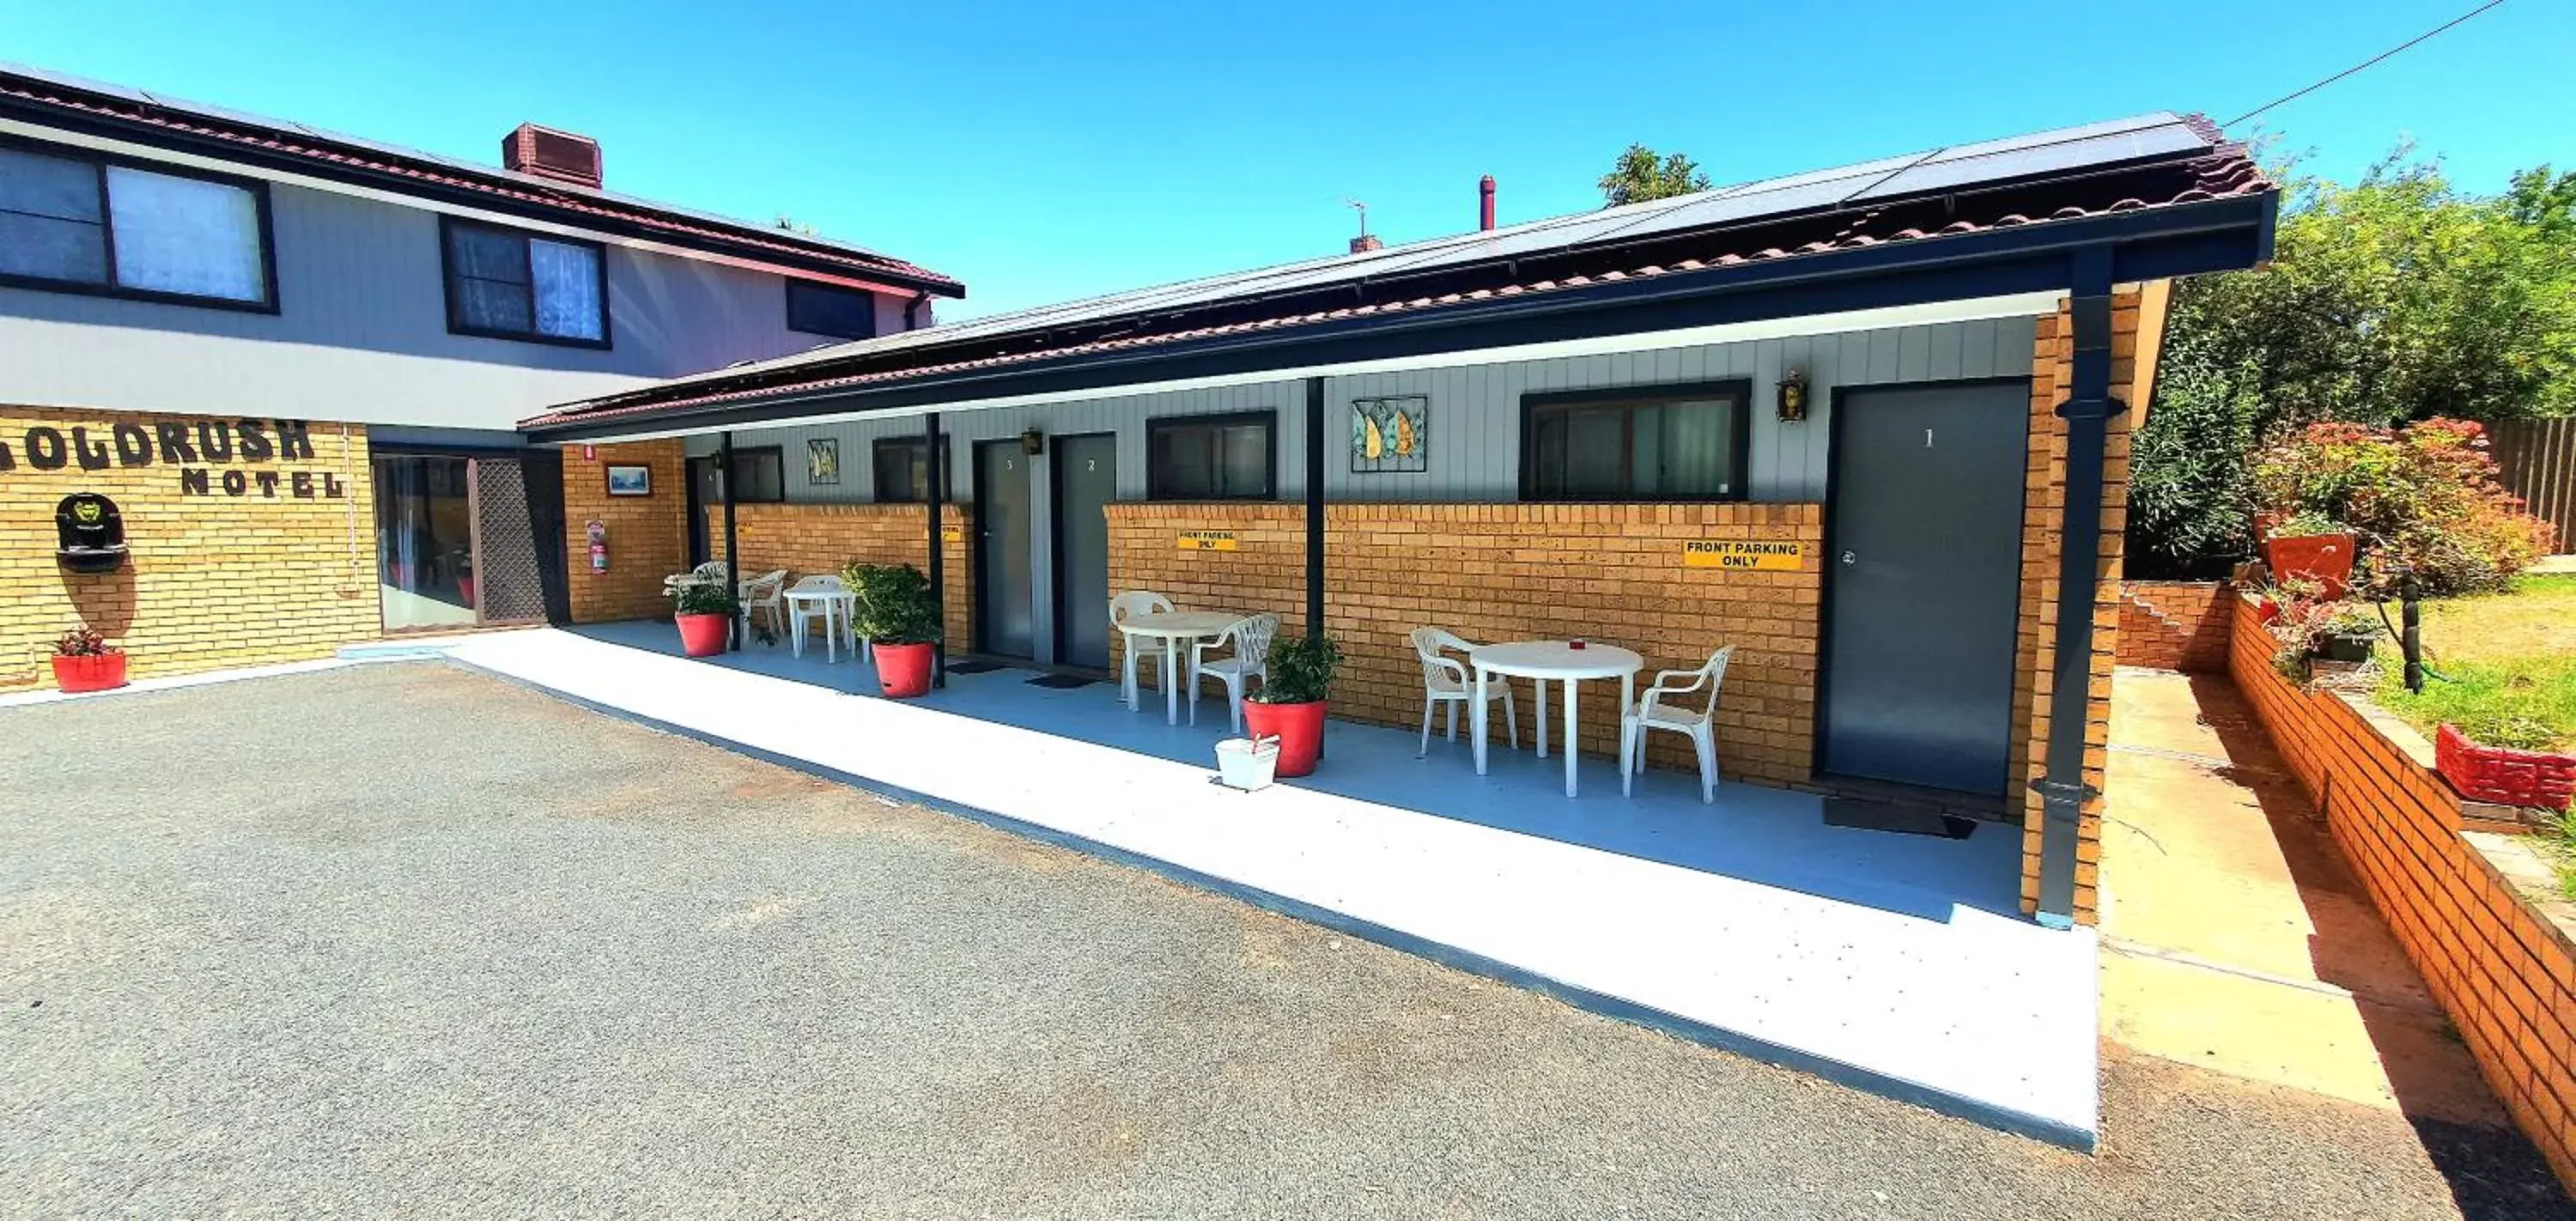 Property Building in Goldrush Motel Young CBD